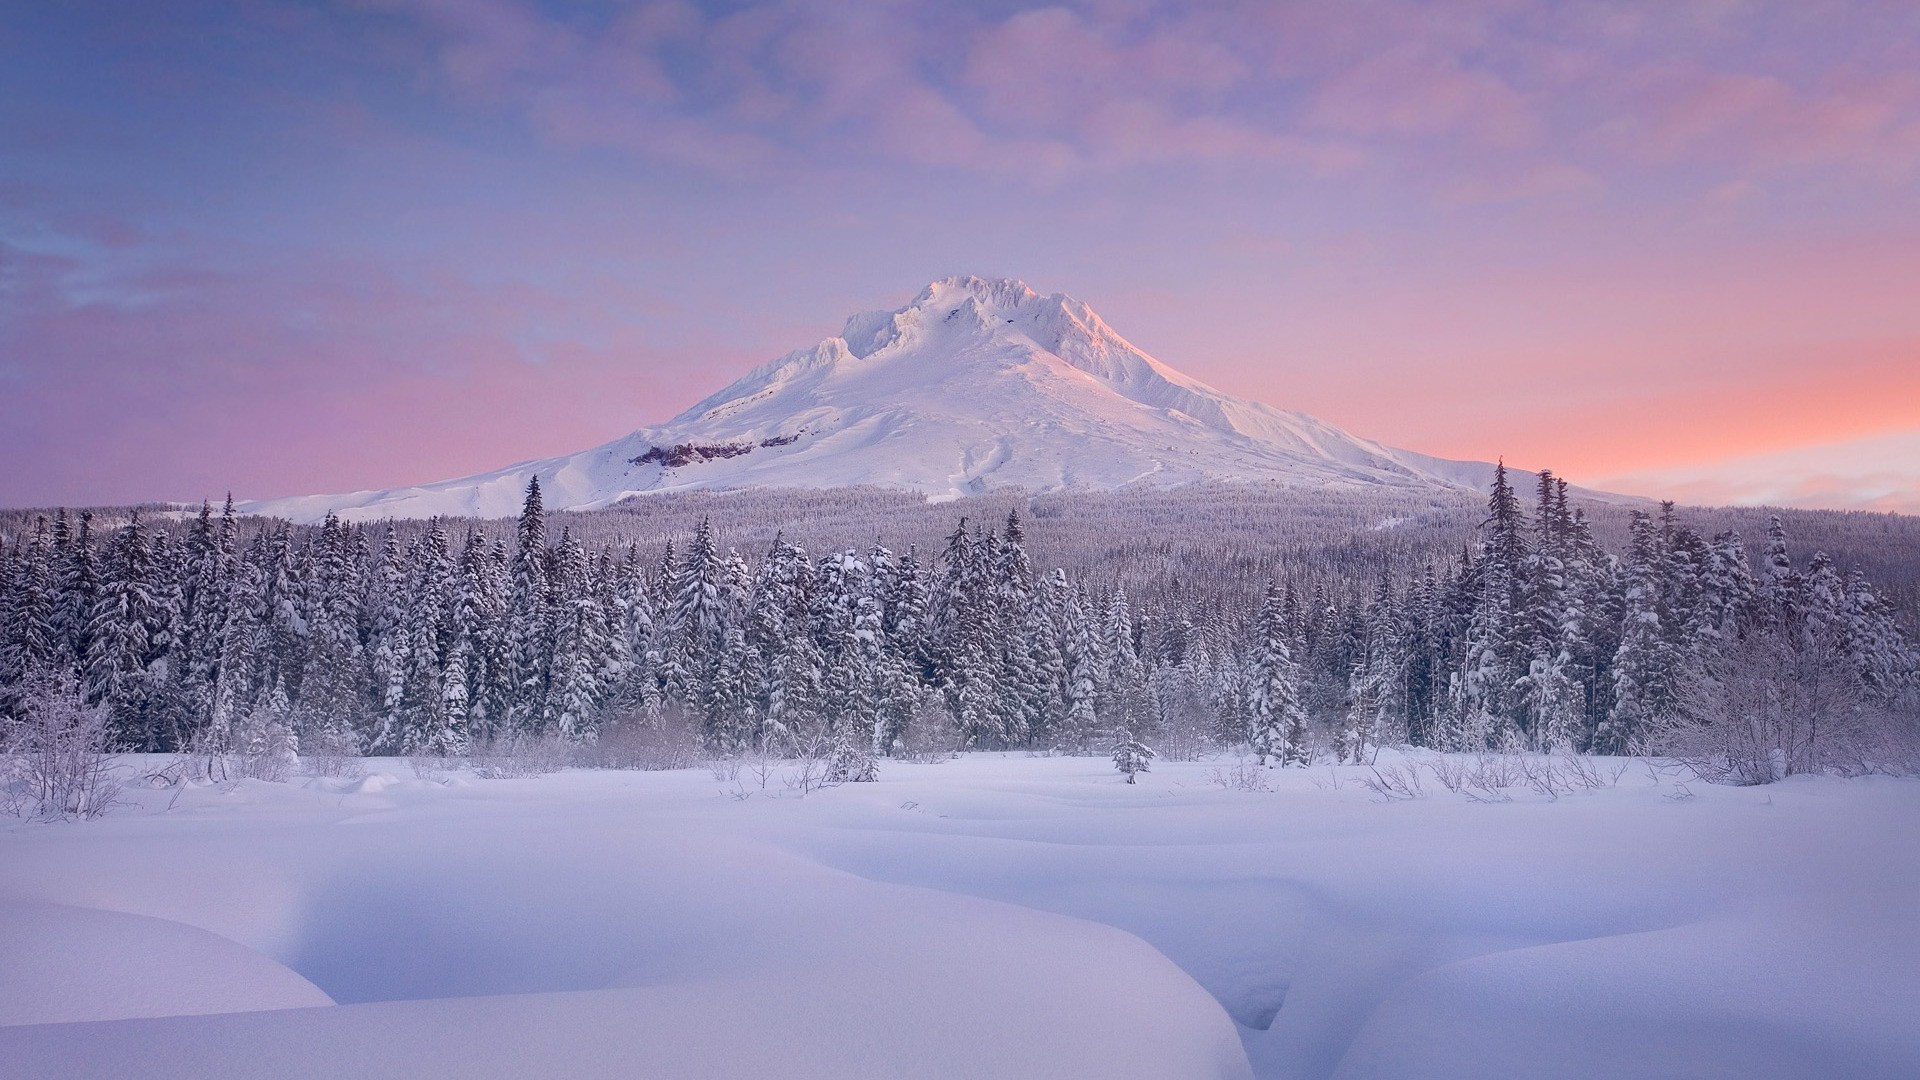 General 1920x1080 winter mountains landscape Mount Hood Oregon snow forest snowy peak snowy mountain cold outdoors ice trees nature USA